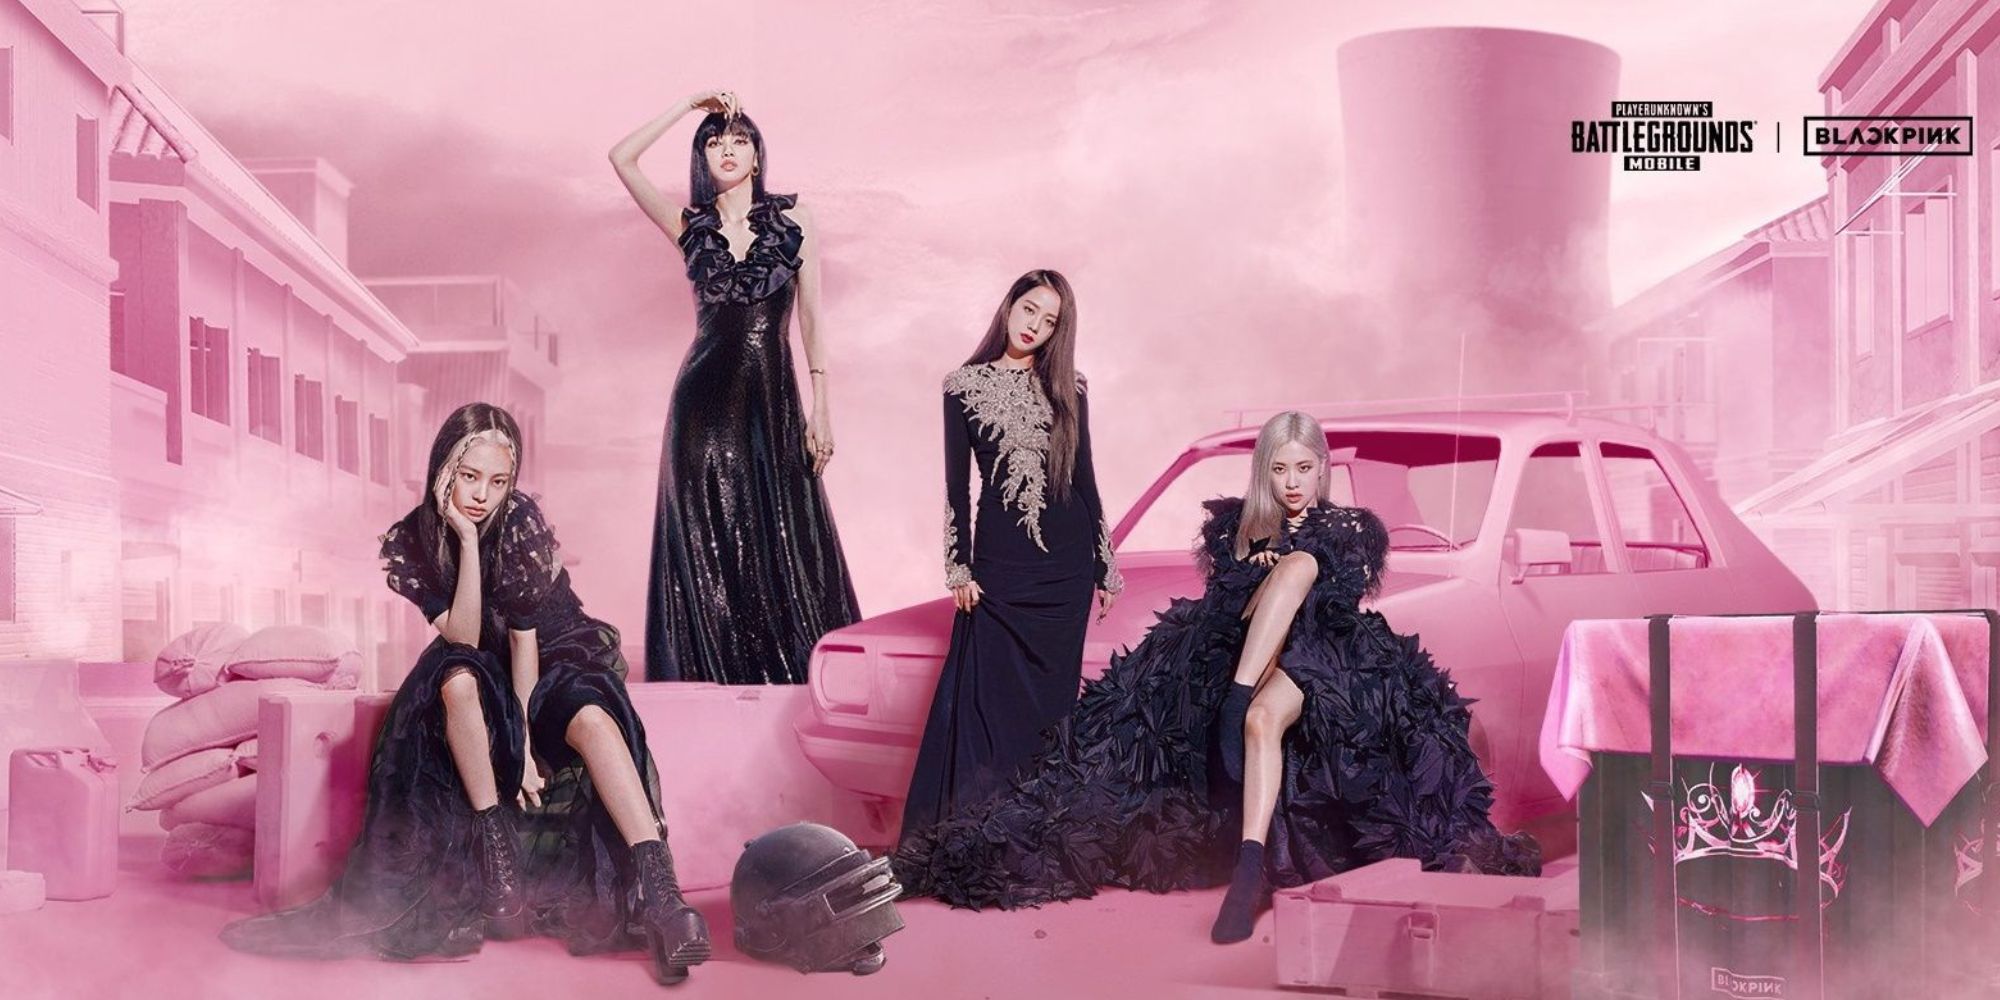 Blackpink pubg collab banner showing all the members of the group in black dresses and a pink background